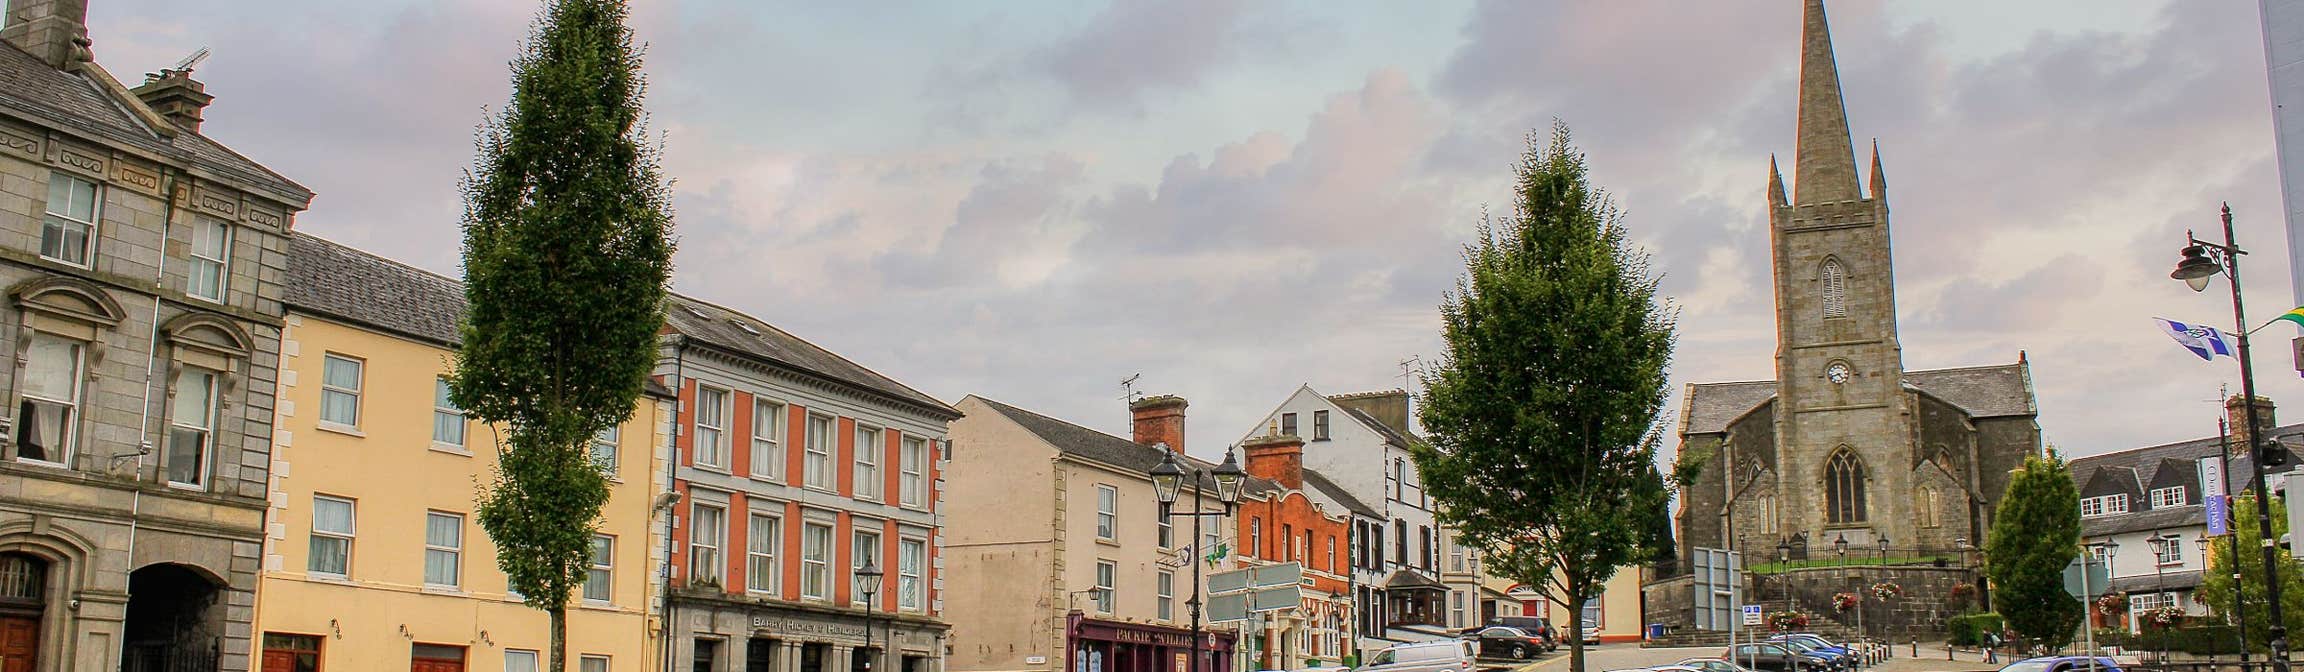 Image of Clones town in County Monaghan